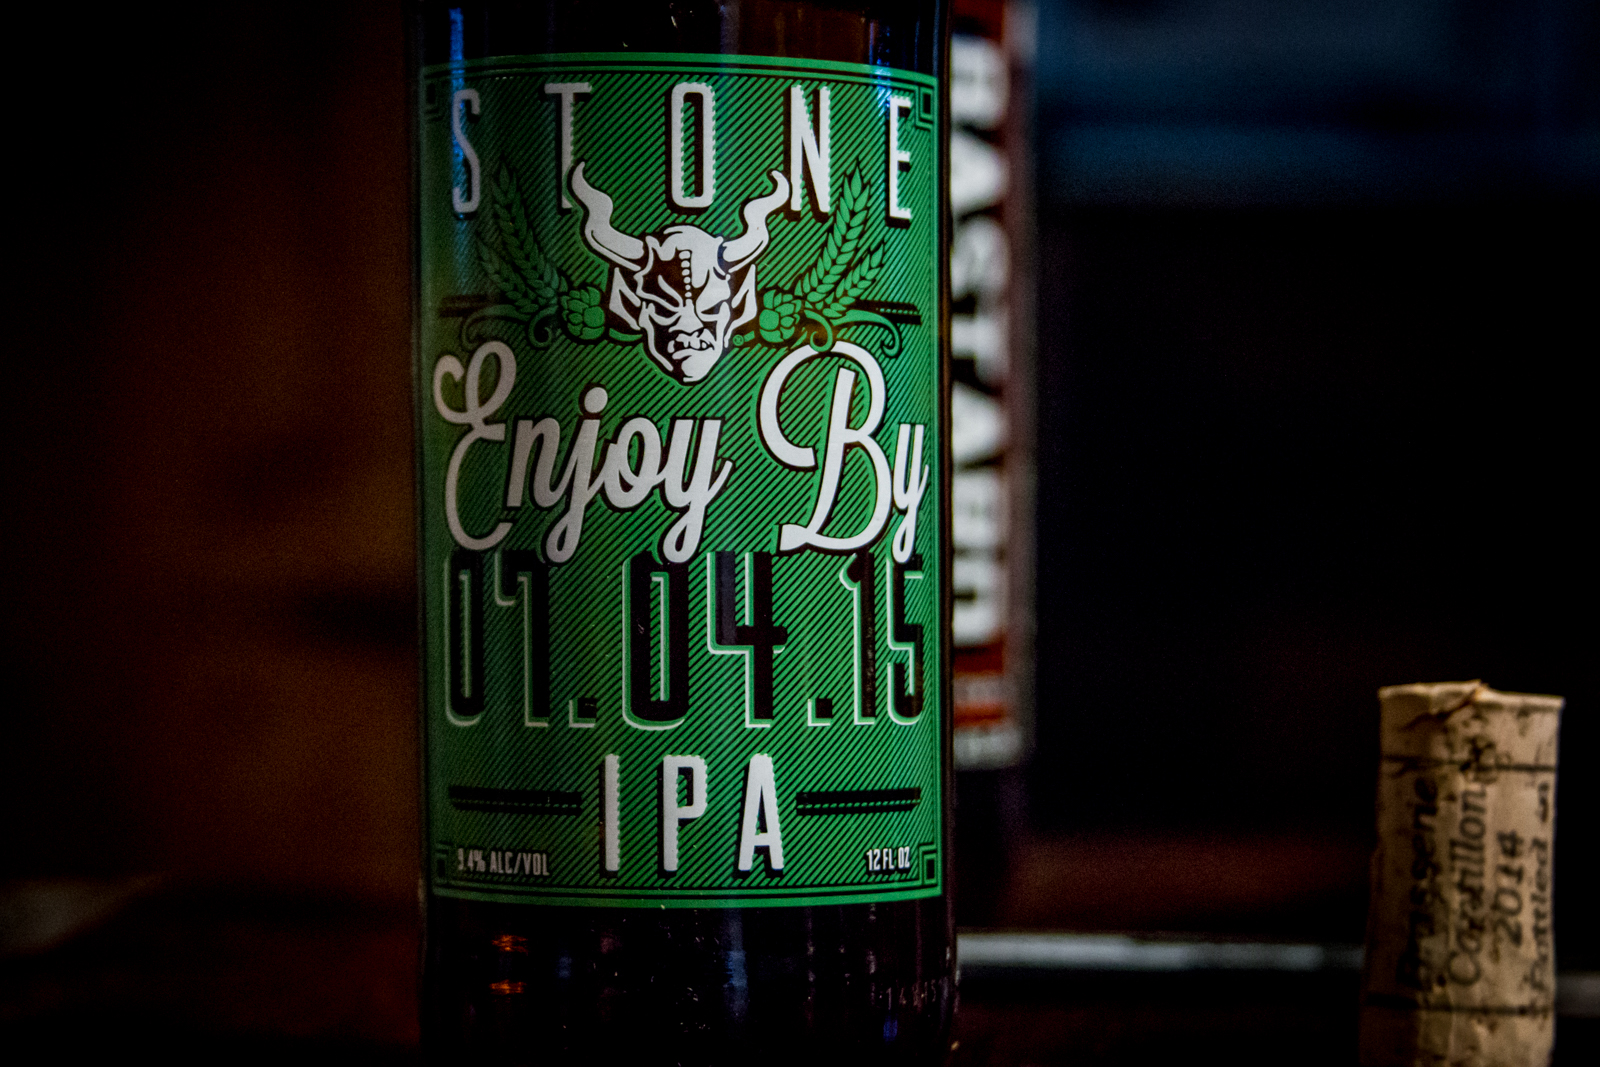 Stone Brewing Co. - Enjoy By 07.04.15 IPA